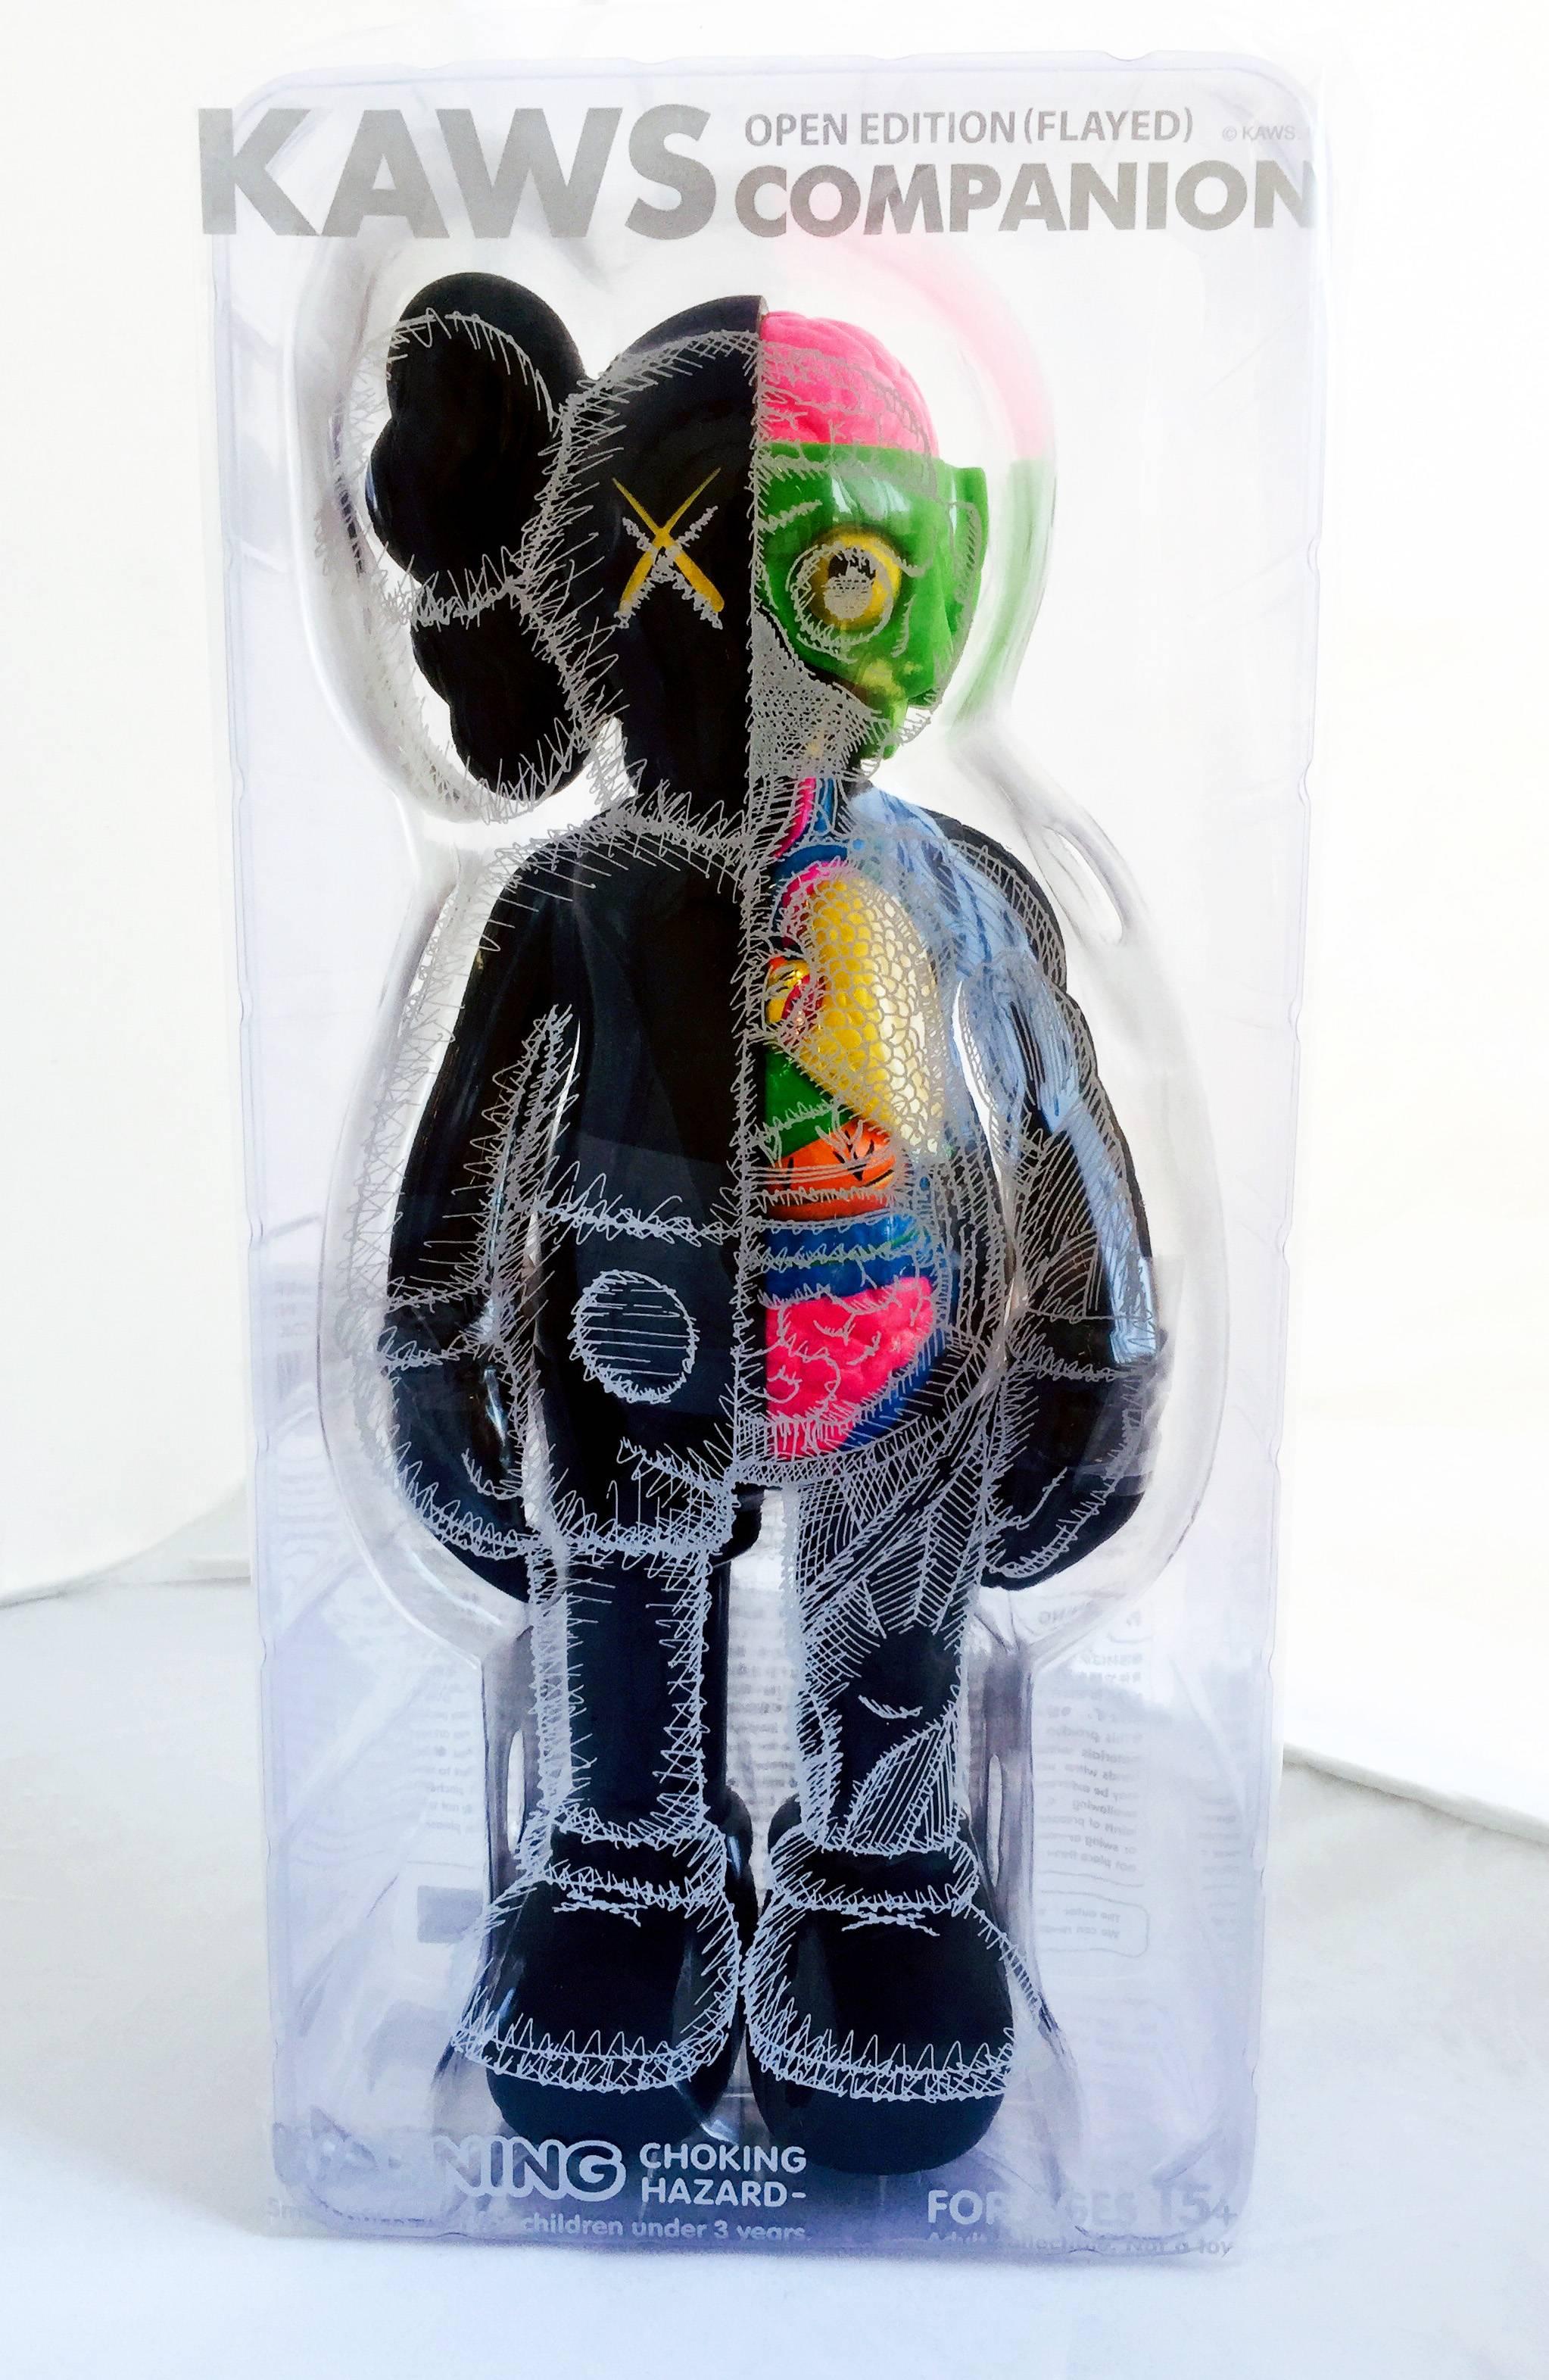 KAWS Companion: Set of 3 Flayed Companions. Each, new and sealed in original packaging. Published by Medicom Japan in conjunction with the exhibition, KAWS: Where The End Starts at the Modern Art Museum of Fort Worth in 2016. These figurines have